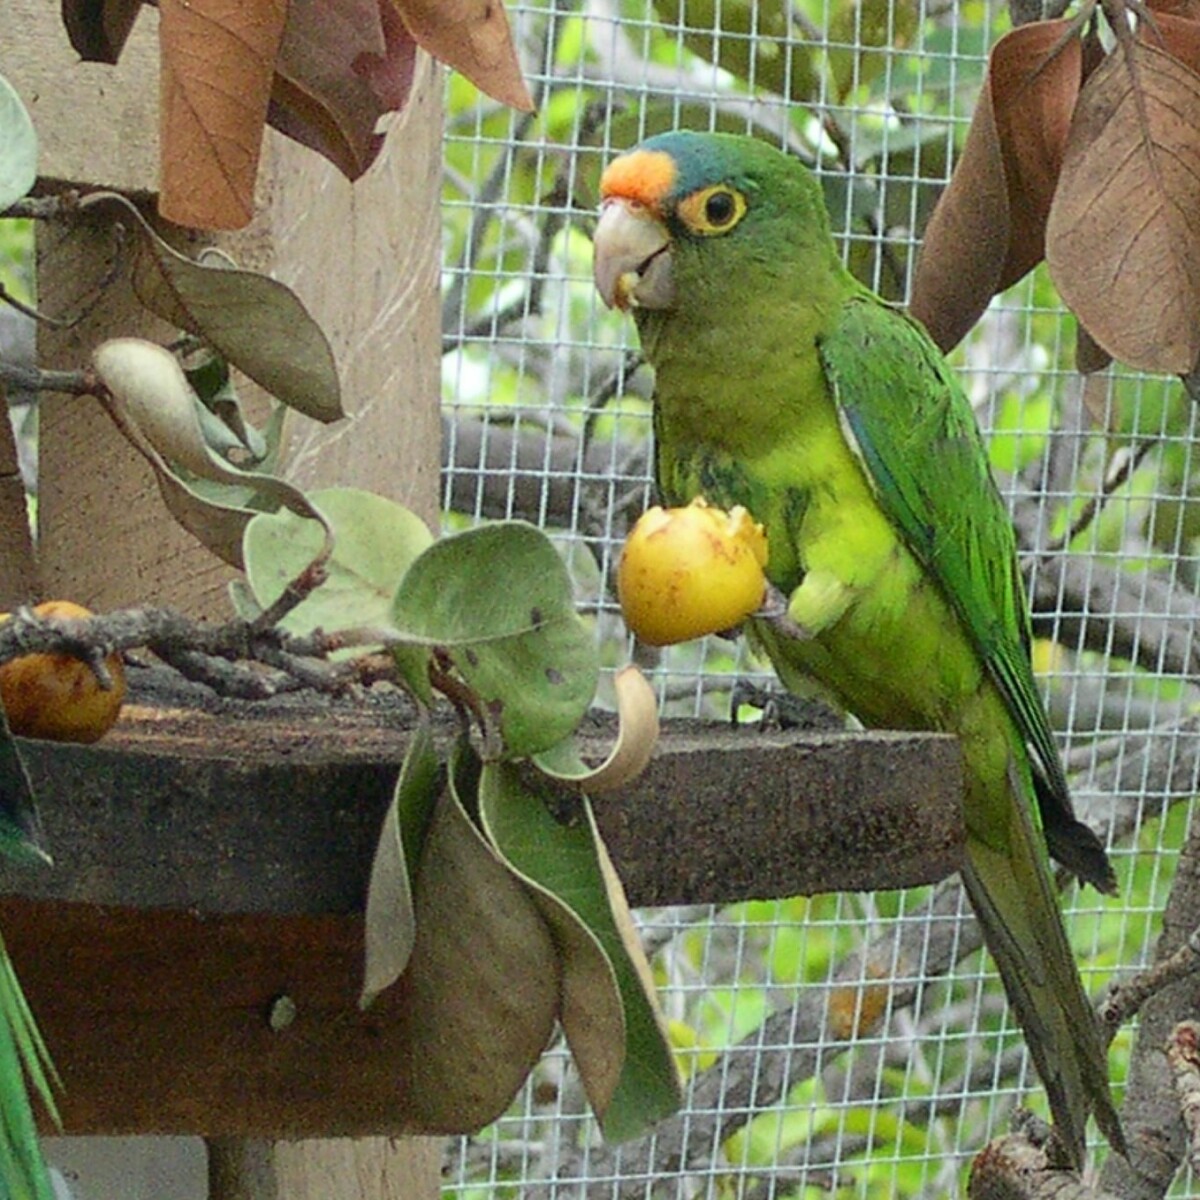 Parrots use sounds like people use names